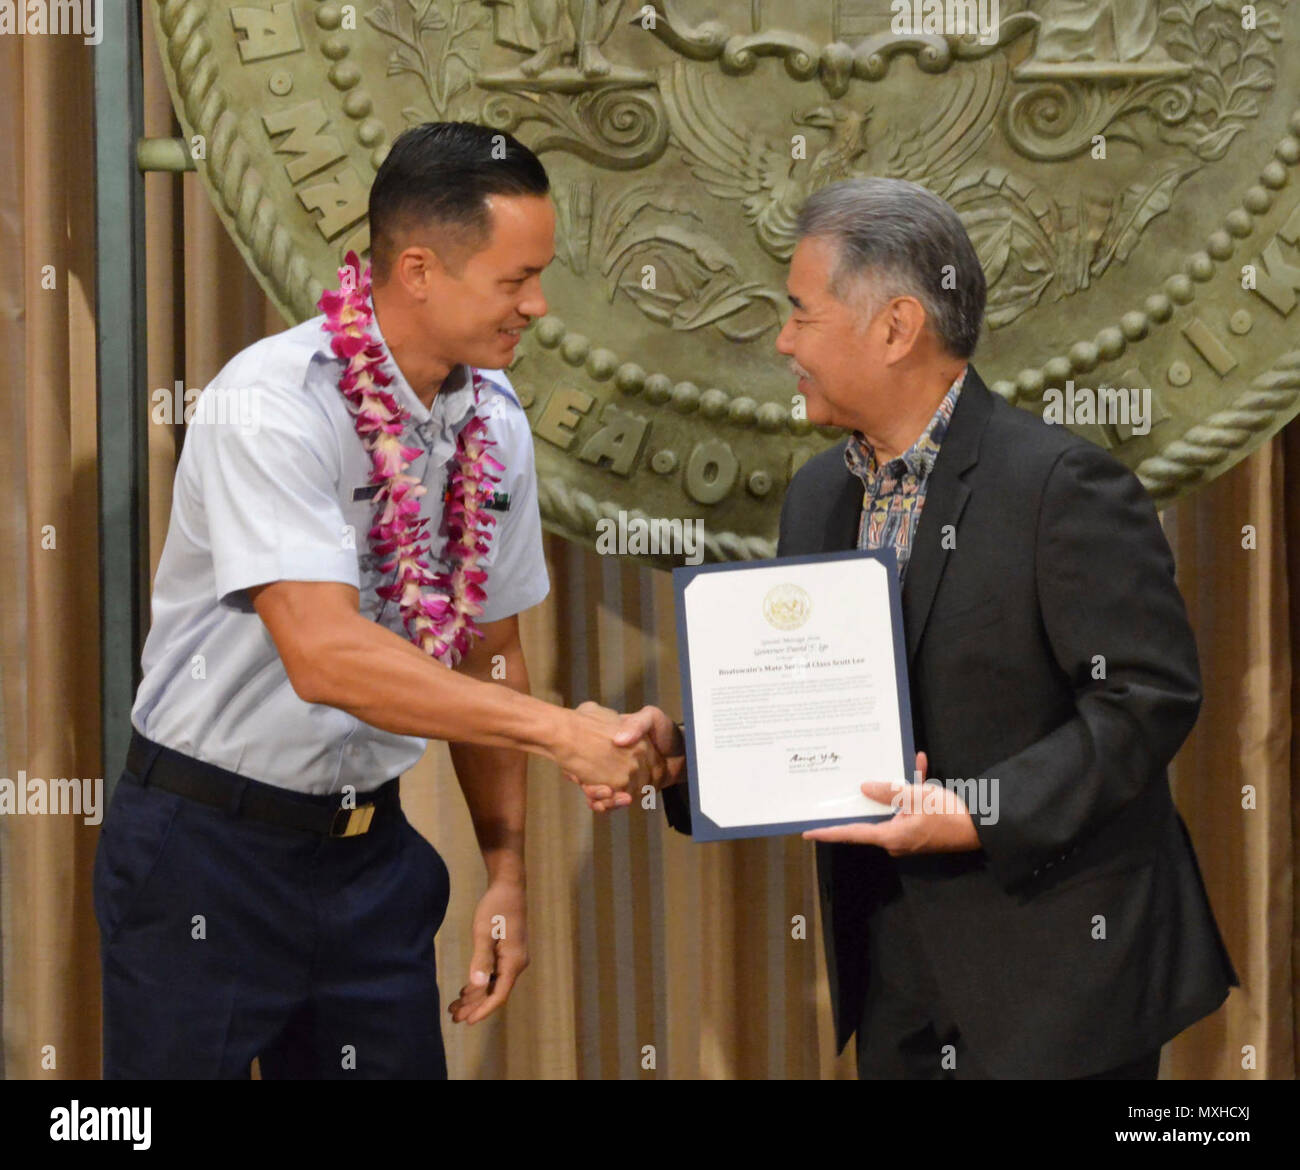 Petty Officer 2nd Class Scott Lee, a boatswain’s mate stationed at Coast Guard Station Honolulu, was recognized for his outstanding community service by Hawaii State Governor David Y. Ige at the Hawaii State Capitol, May 5, 2017. The Military Affairs Council of the Chamber of Commerce Hawaii joined Governor Ige in a proclamation ceremony designating May as Military Appreciation Month and honoring service members from all five branches of the armed forces for their community service contributions. Stock Photo